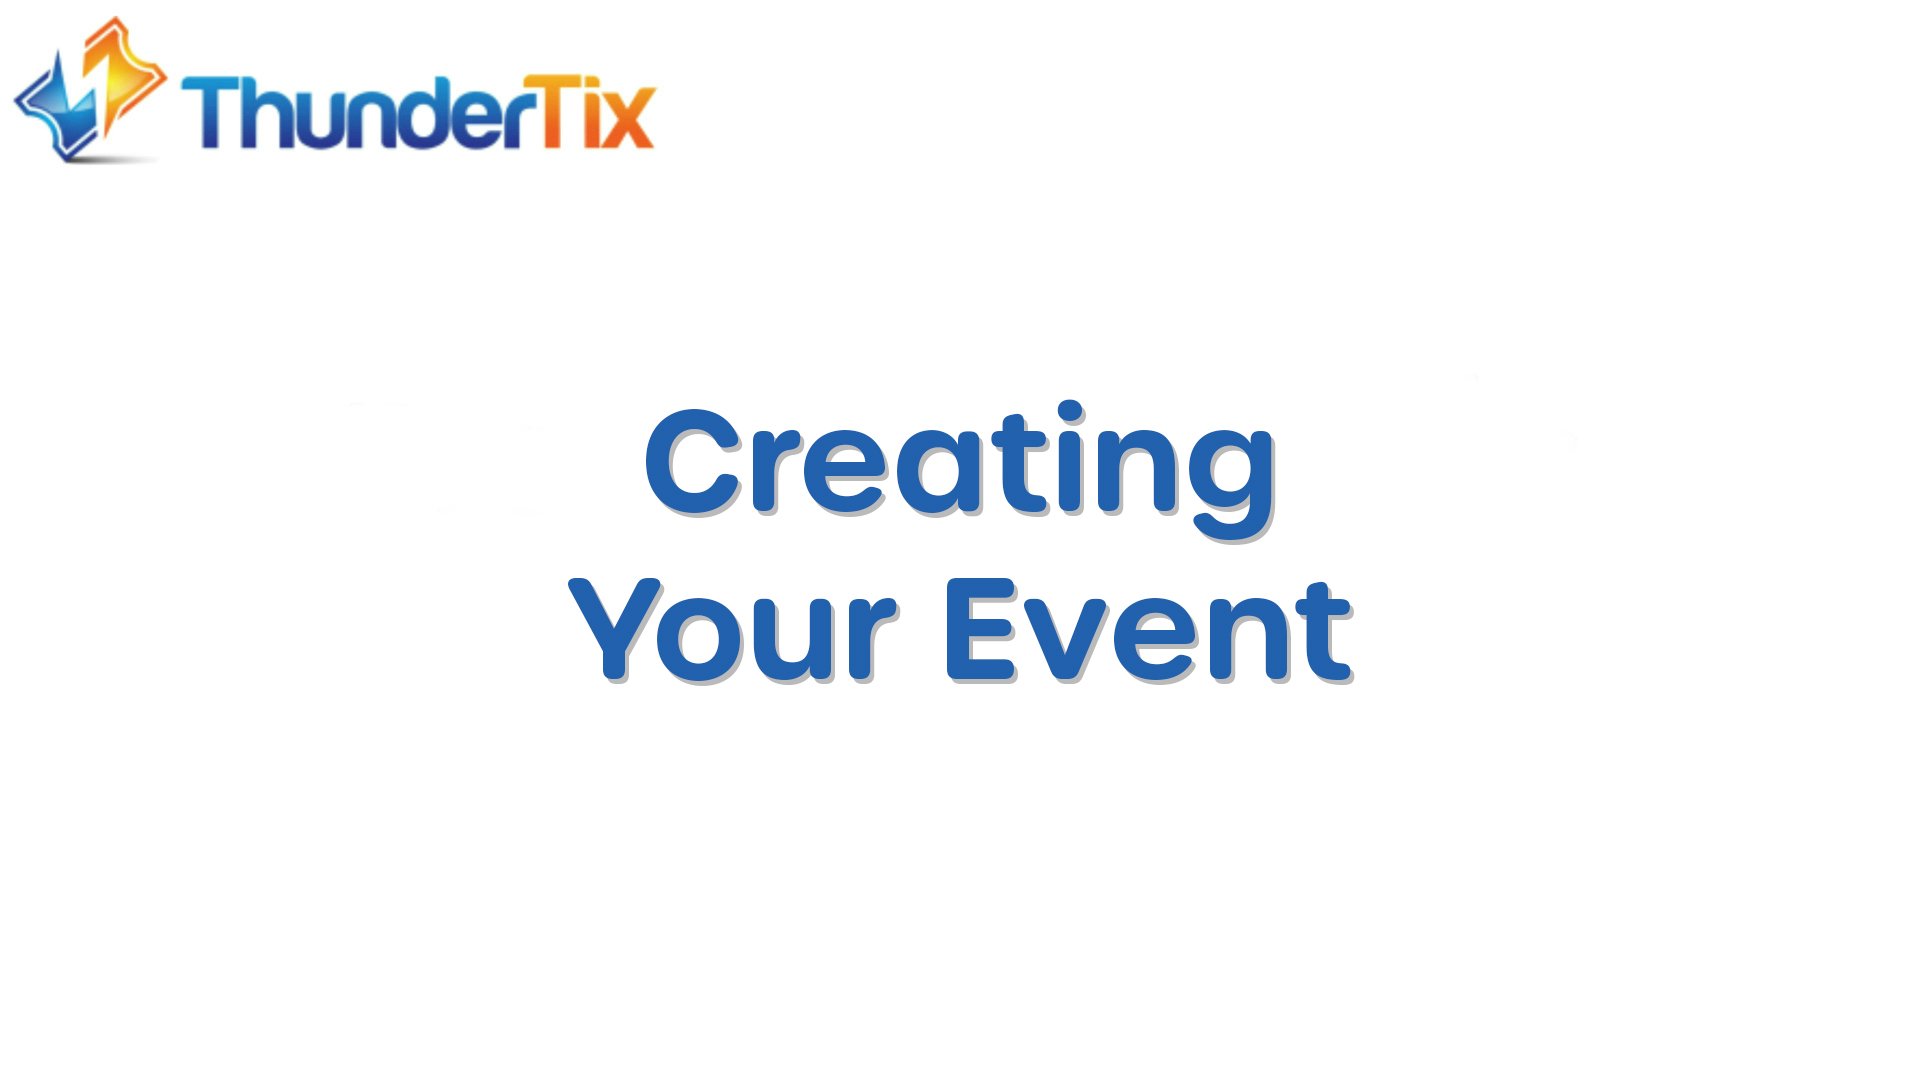 Creating Your Event Video Tutorial